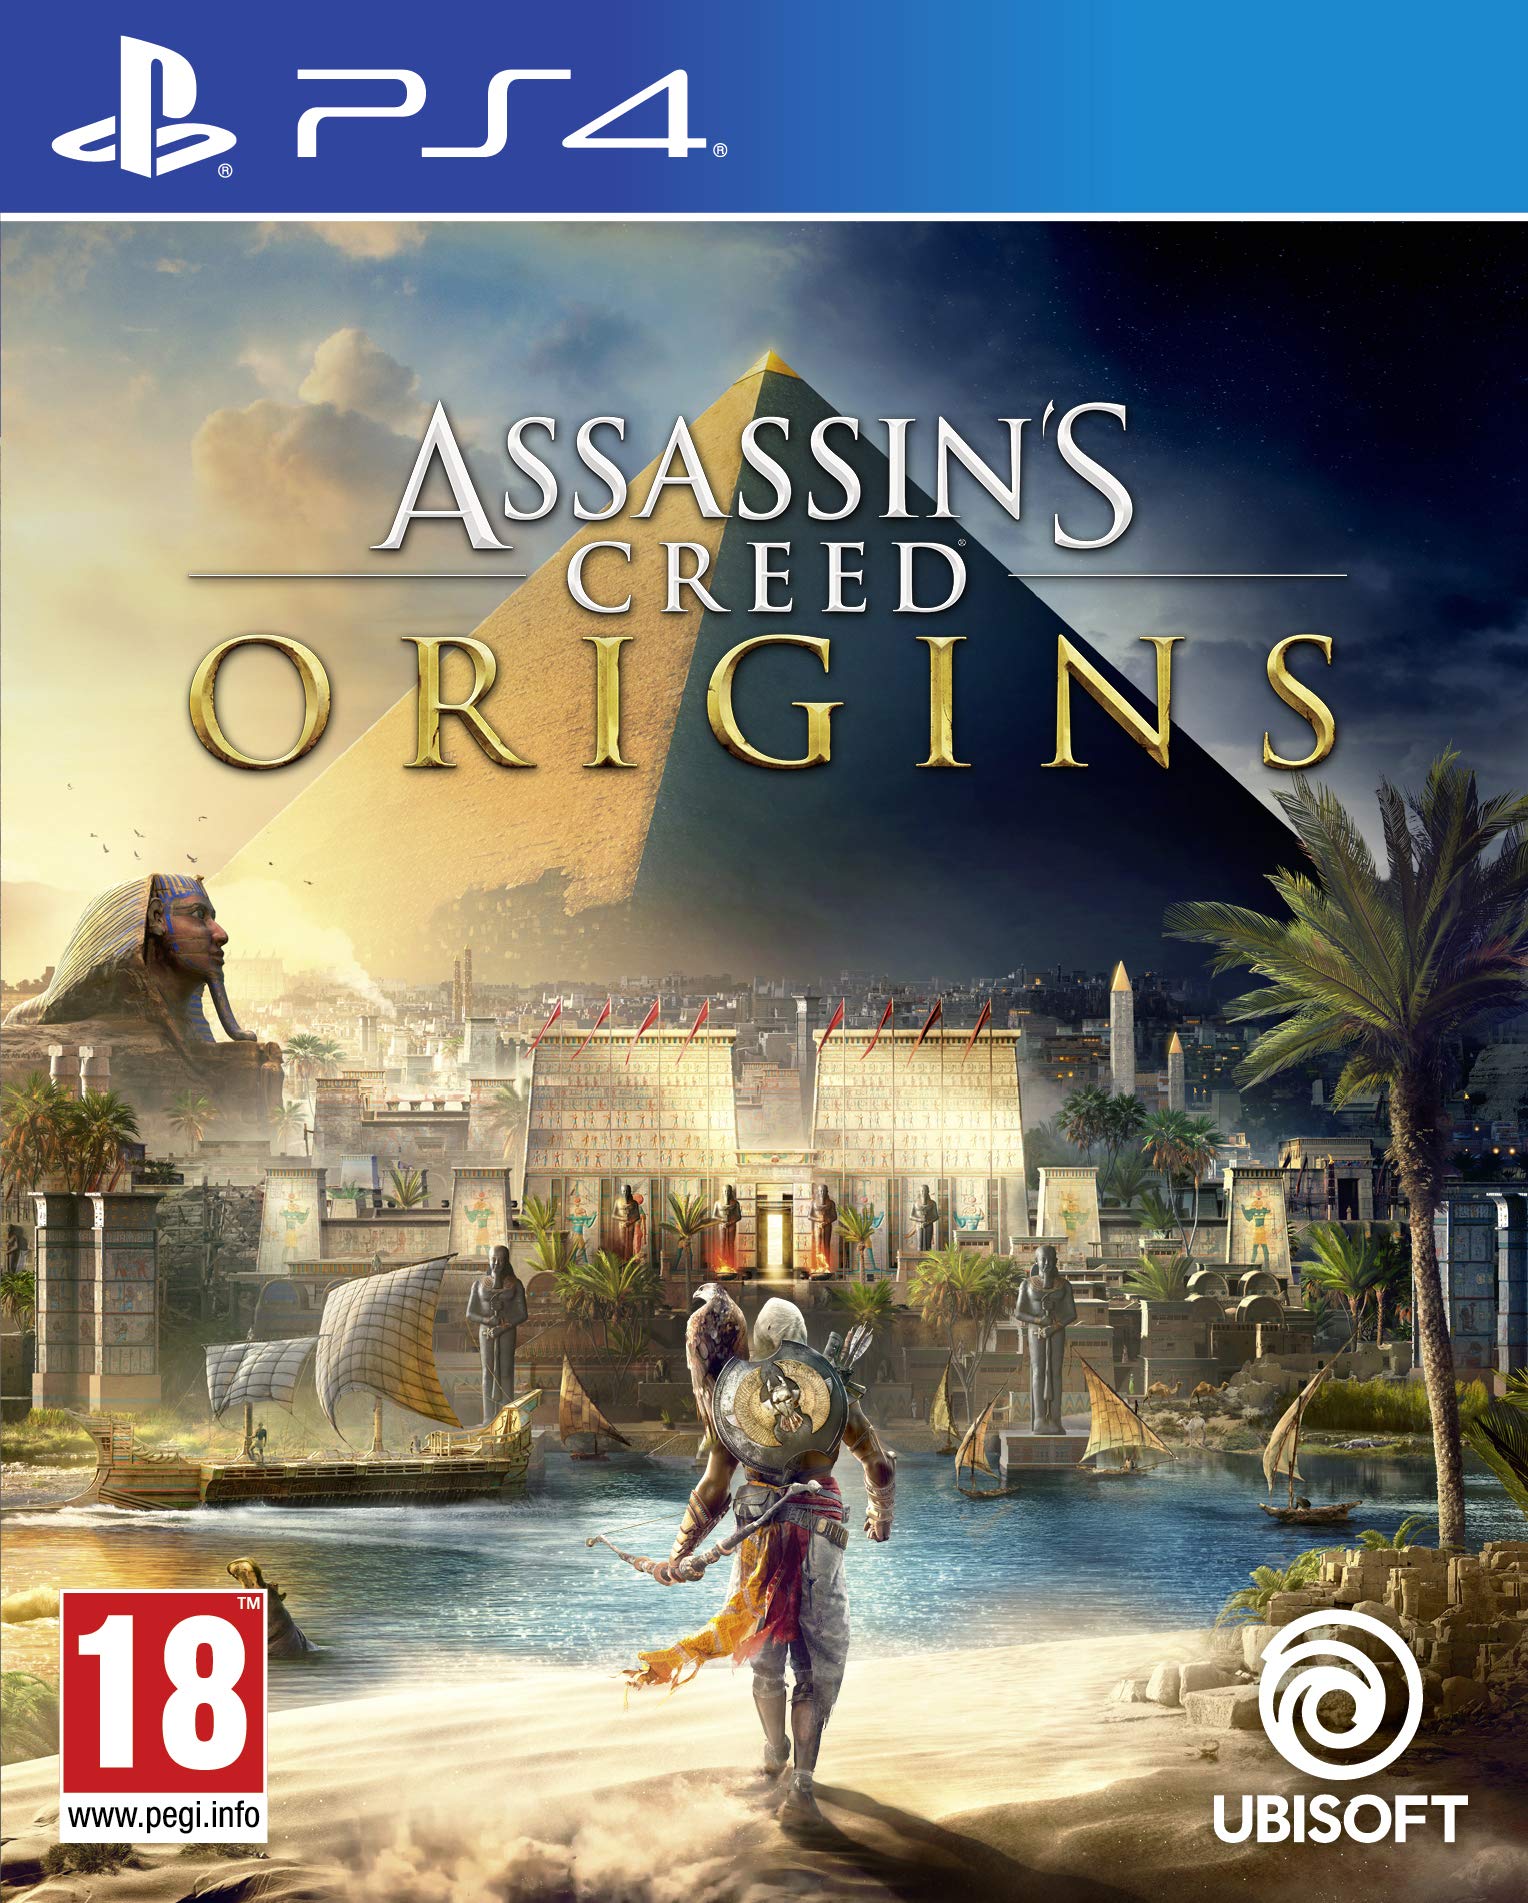 Book Cover Ubisoft Assassin's Creed Origins, PS4 Basic PlayStation 4 video game - video games (PS4, Basic, PlayStation 4, Action / Adventure, RP (Rating Pending), Ubisoft Montreal, 27/10/2017)